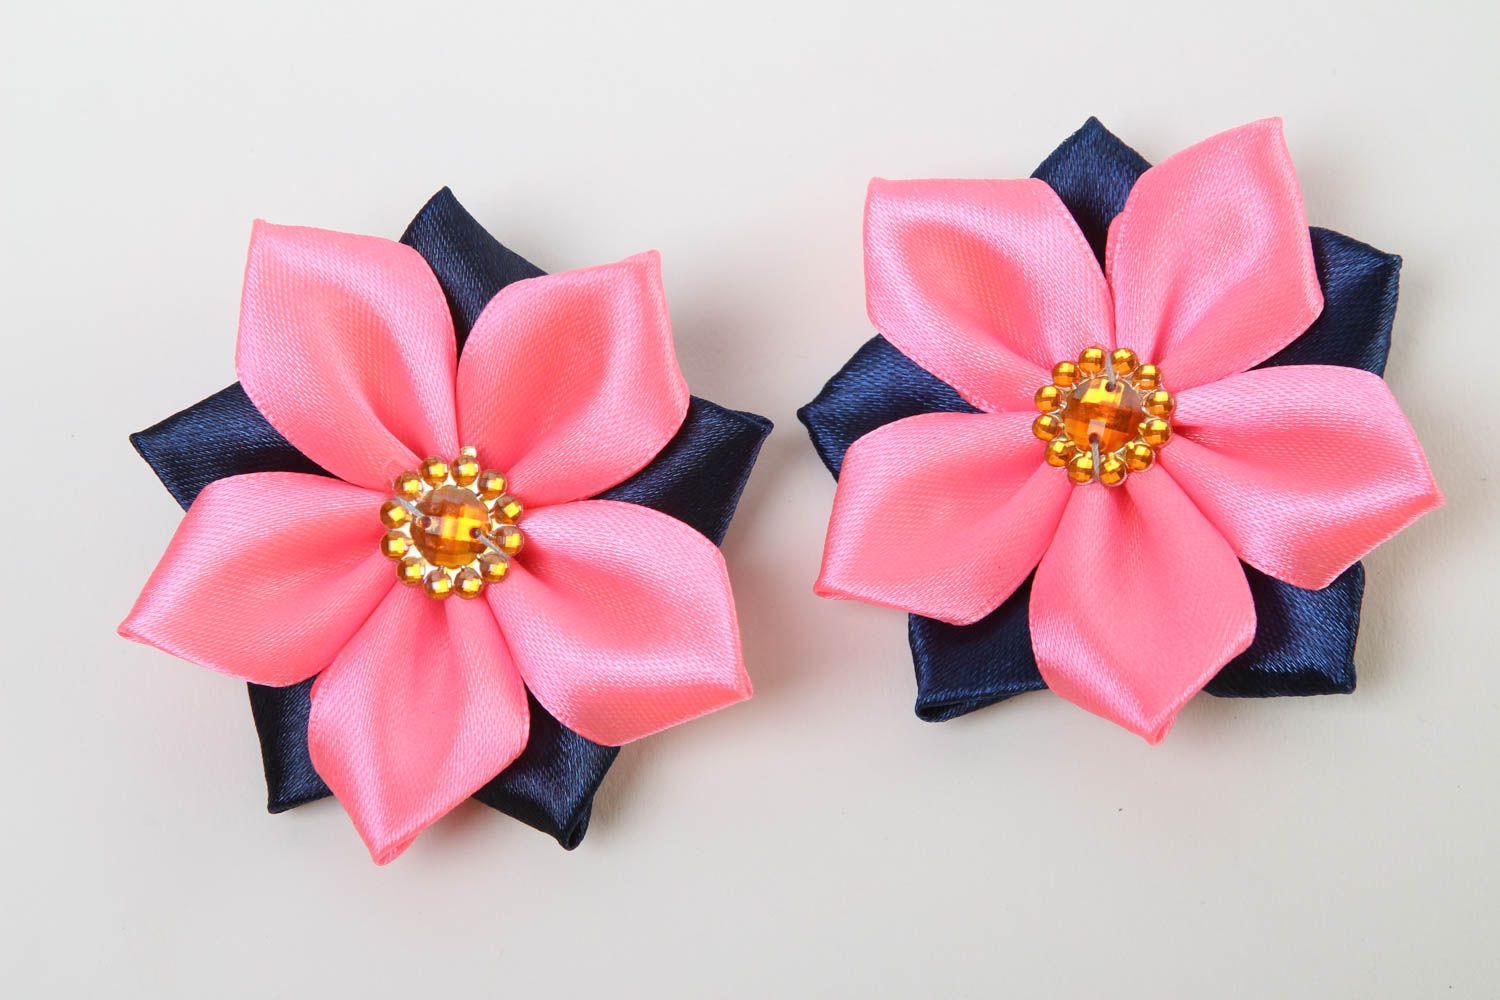 Handmade hair accessories flower hair clips fashion accessories gifts for her photo 2